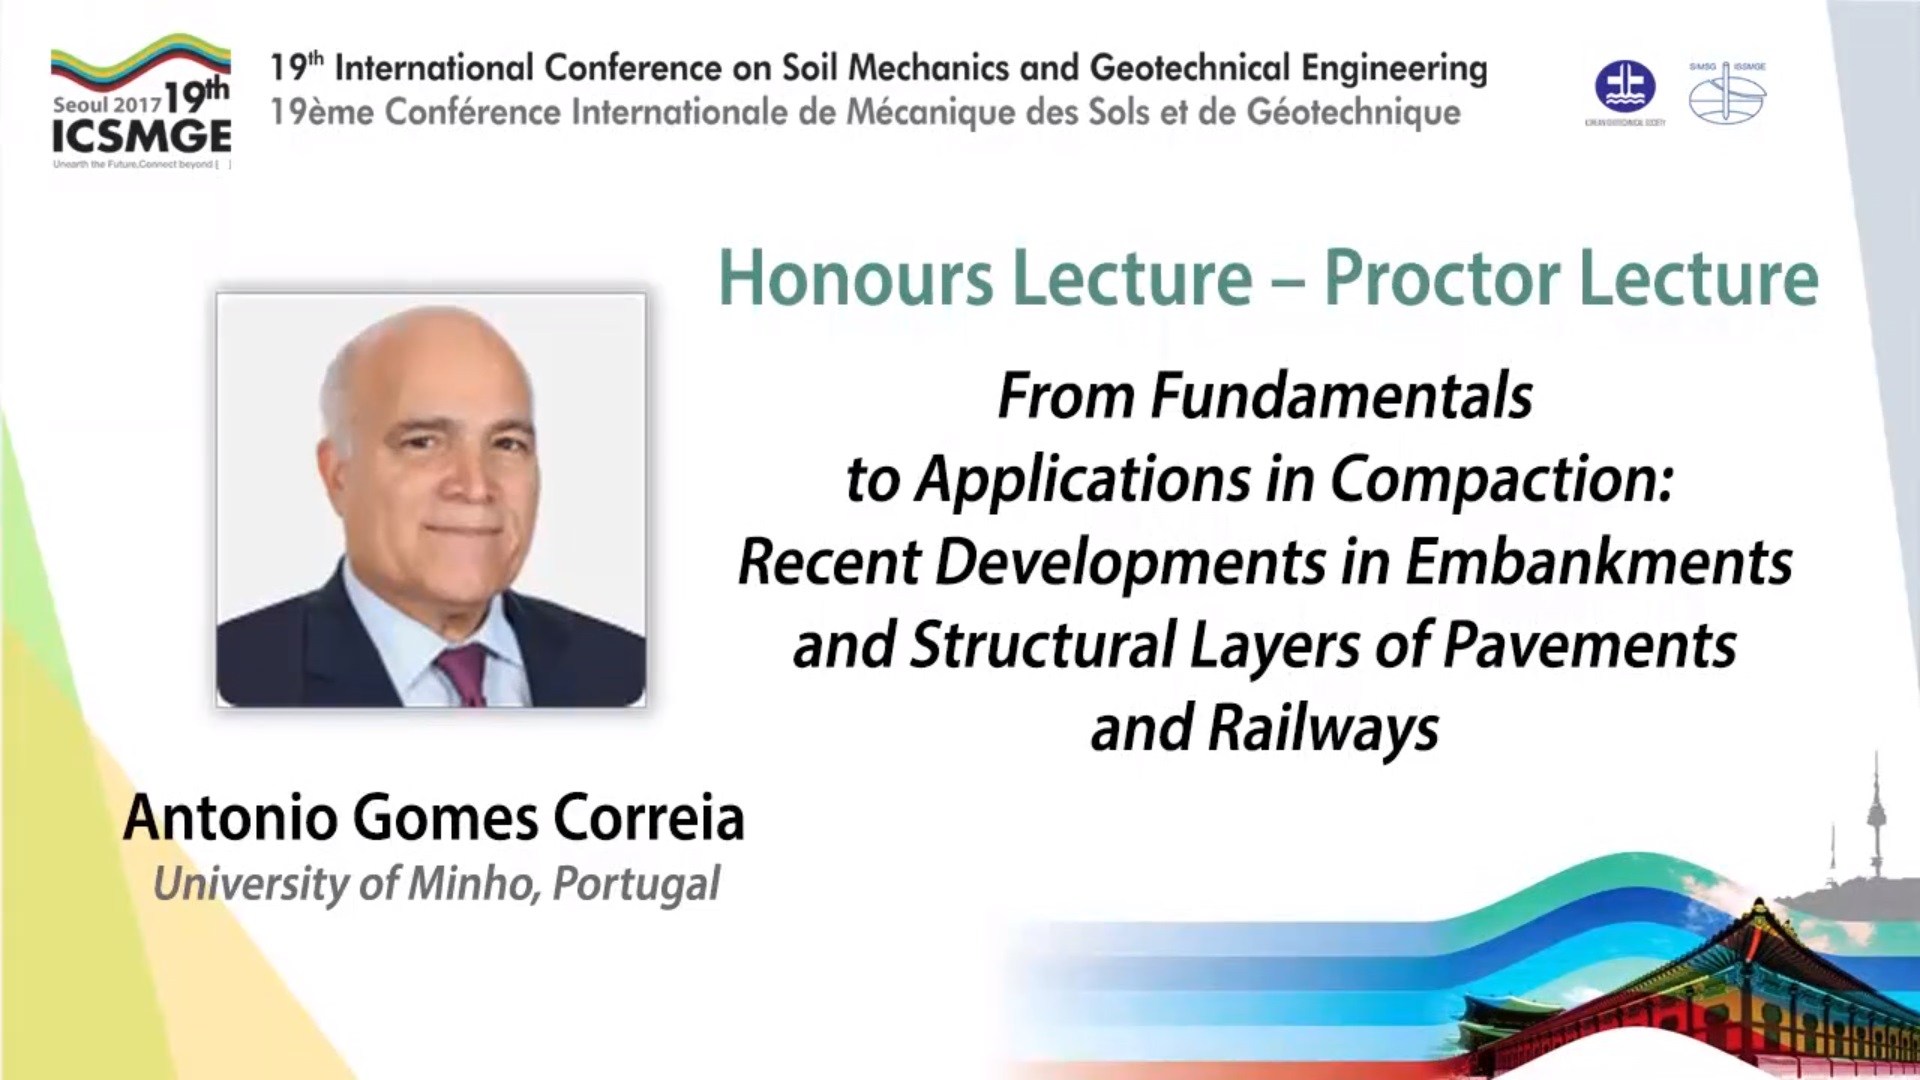 From Fundamentals to Applications in Compaction: Recent Developments in Embankments and Structural Layers of Pavements and Railways (Proctor Lecture - 19th ICSMGE) {"category":"honour_lecture","subjects":["Pavement Geotechnics", "Railway Geotechnics"],"number":"ICSMGE19107","instructors":["Antonio Gomes Correia"]}